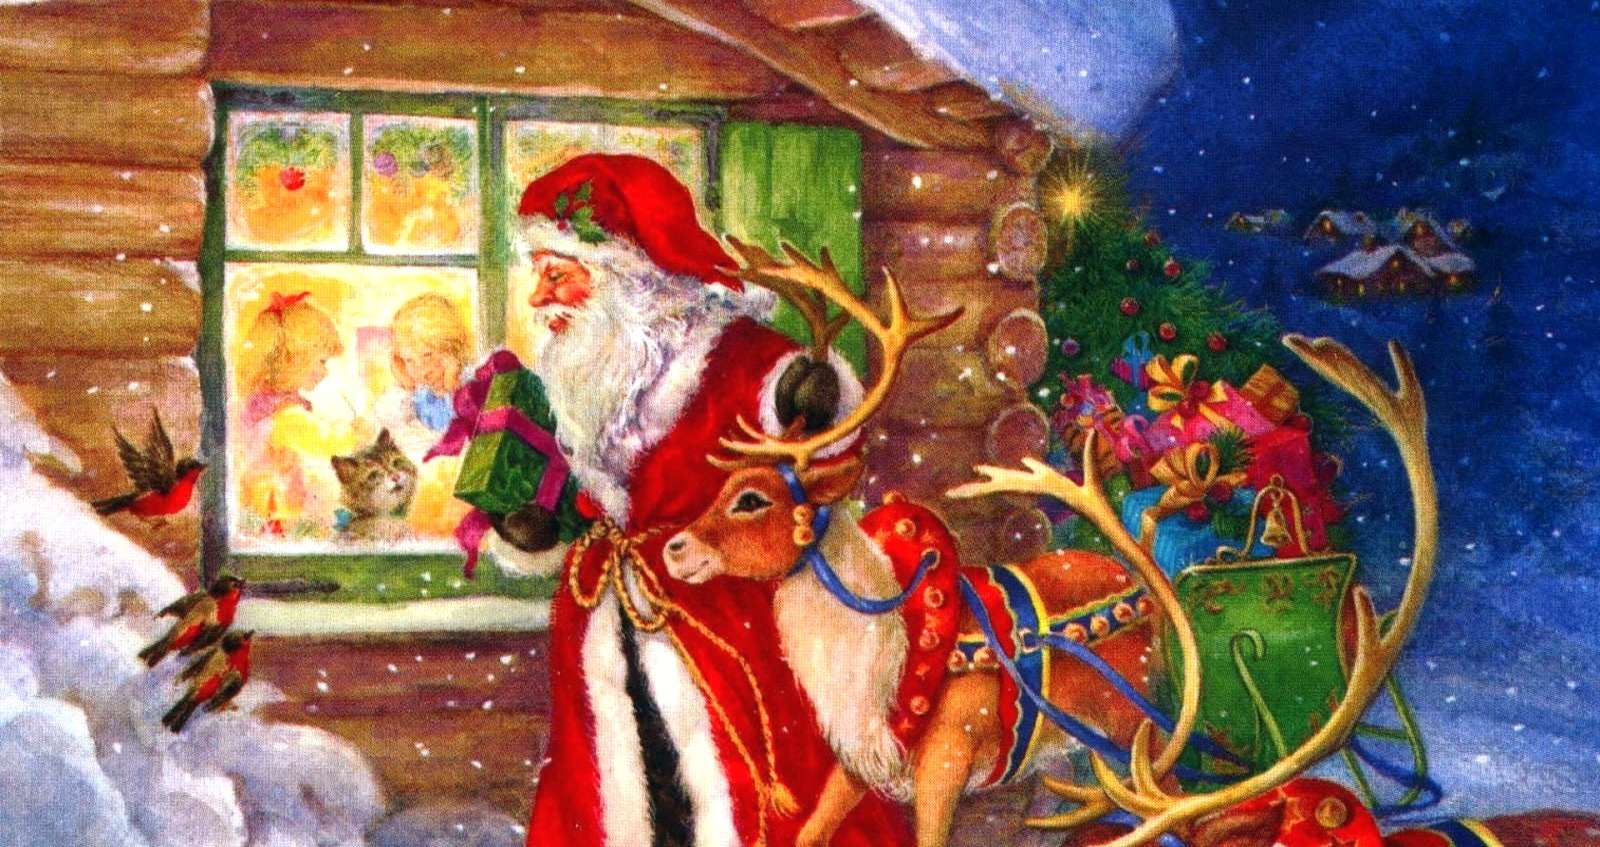 Merry Christmas - Christmas sc jigsaw puzzle online